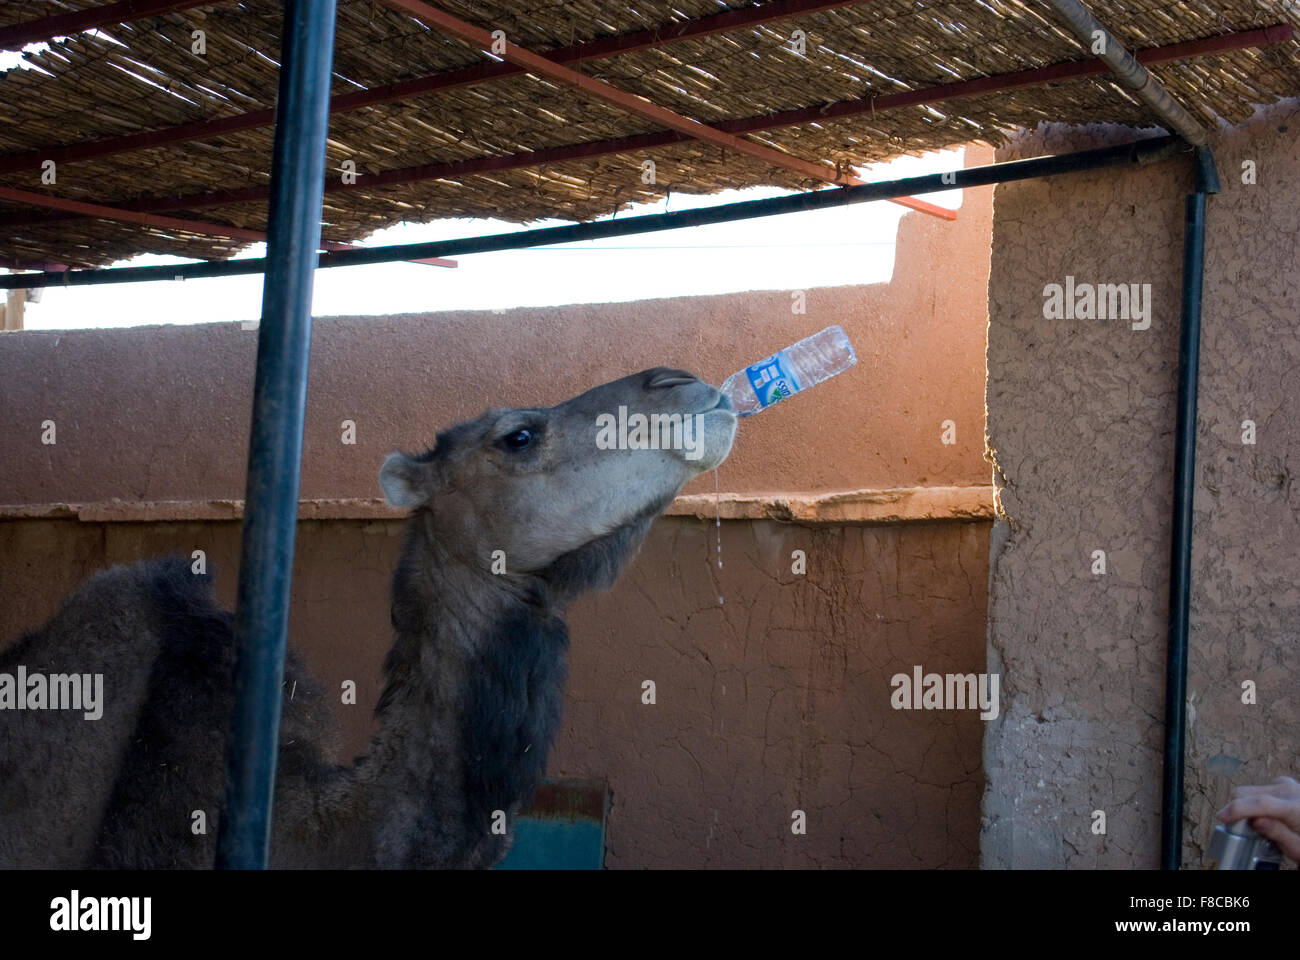 Camel drinking from a plastic water bottle under a thatched roof in an adobe stall Stock Photo